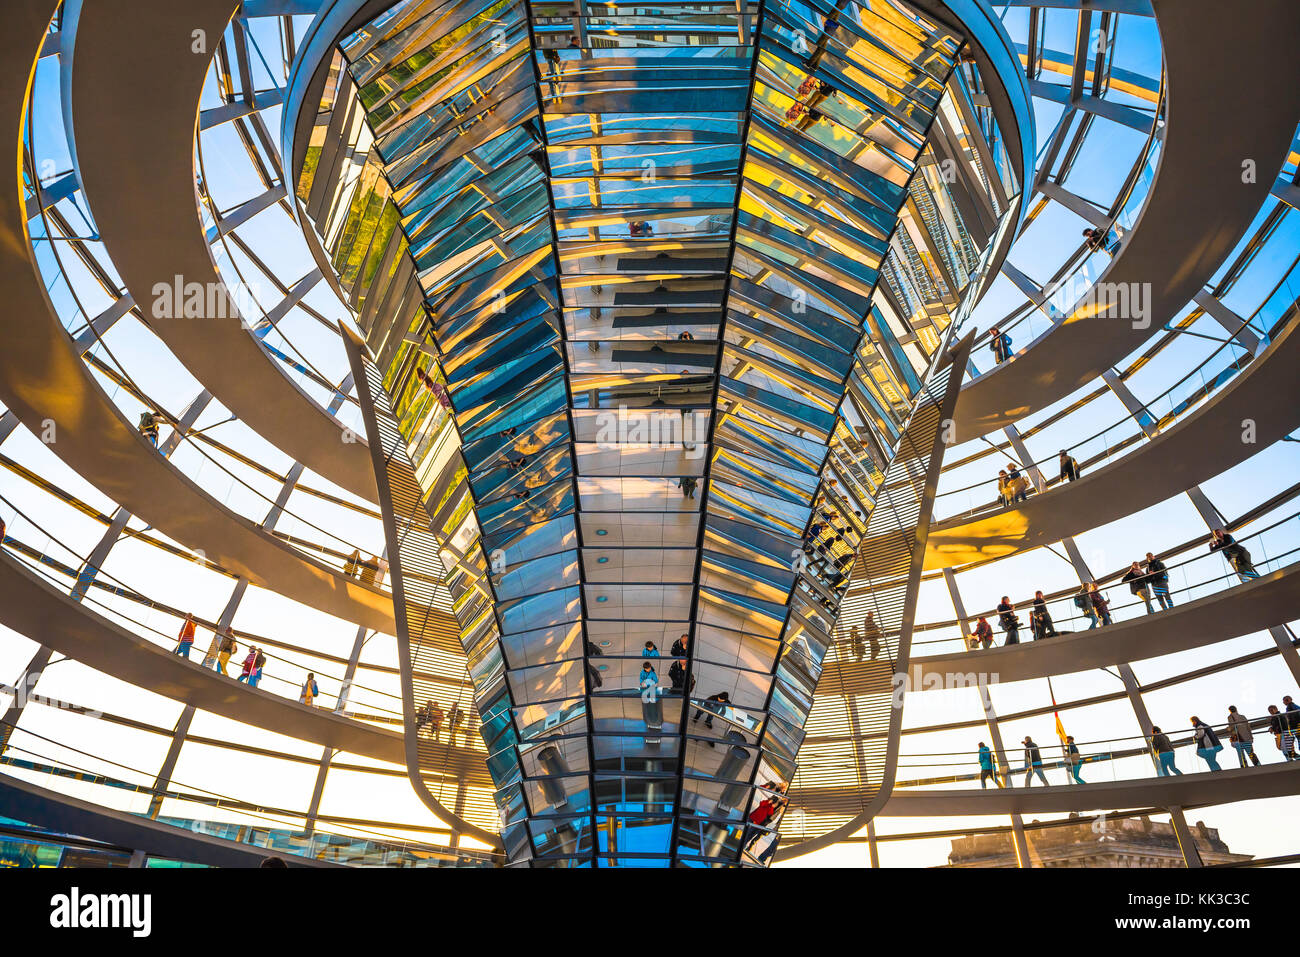 Reichstag dome Berlin, view of tourists walking on the spiral walkway inside the glass covered dome of the German parliament building, Berlin Stock Photo